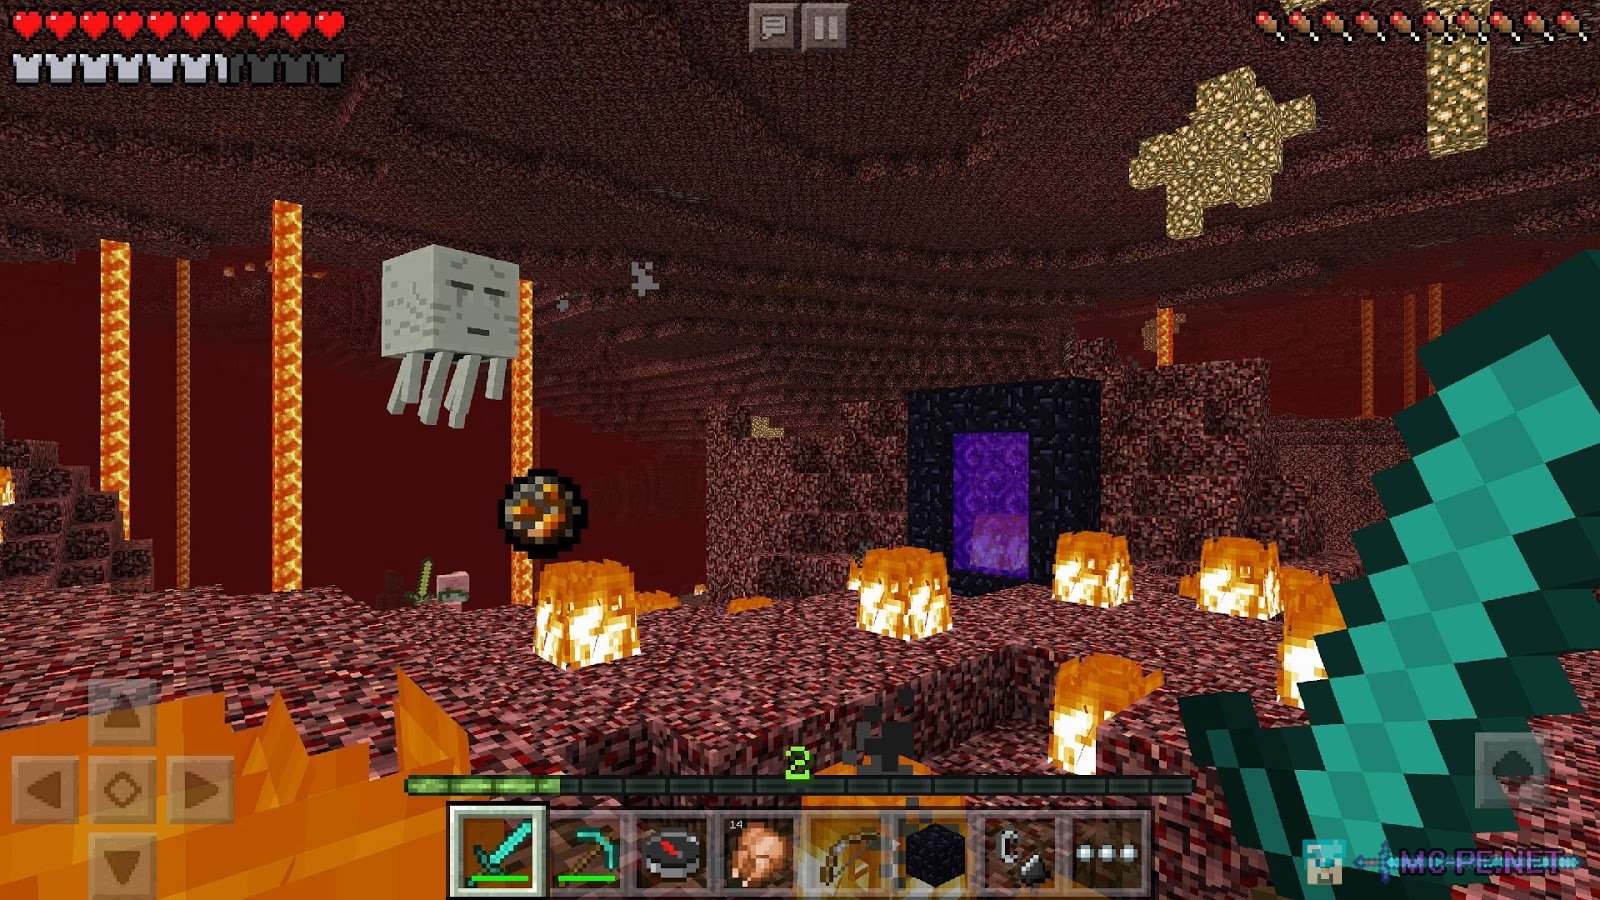 Minecraft: Pocket Edition 1.0.0.16 › Releases › MCPE - Minecraft Pocket  Edition Downloads